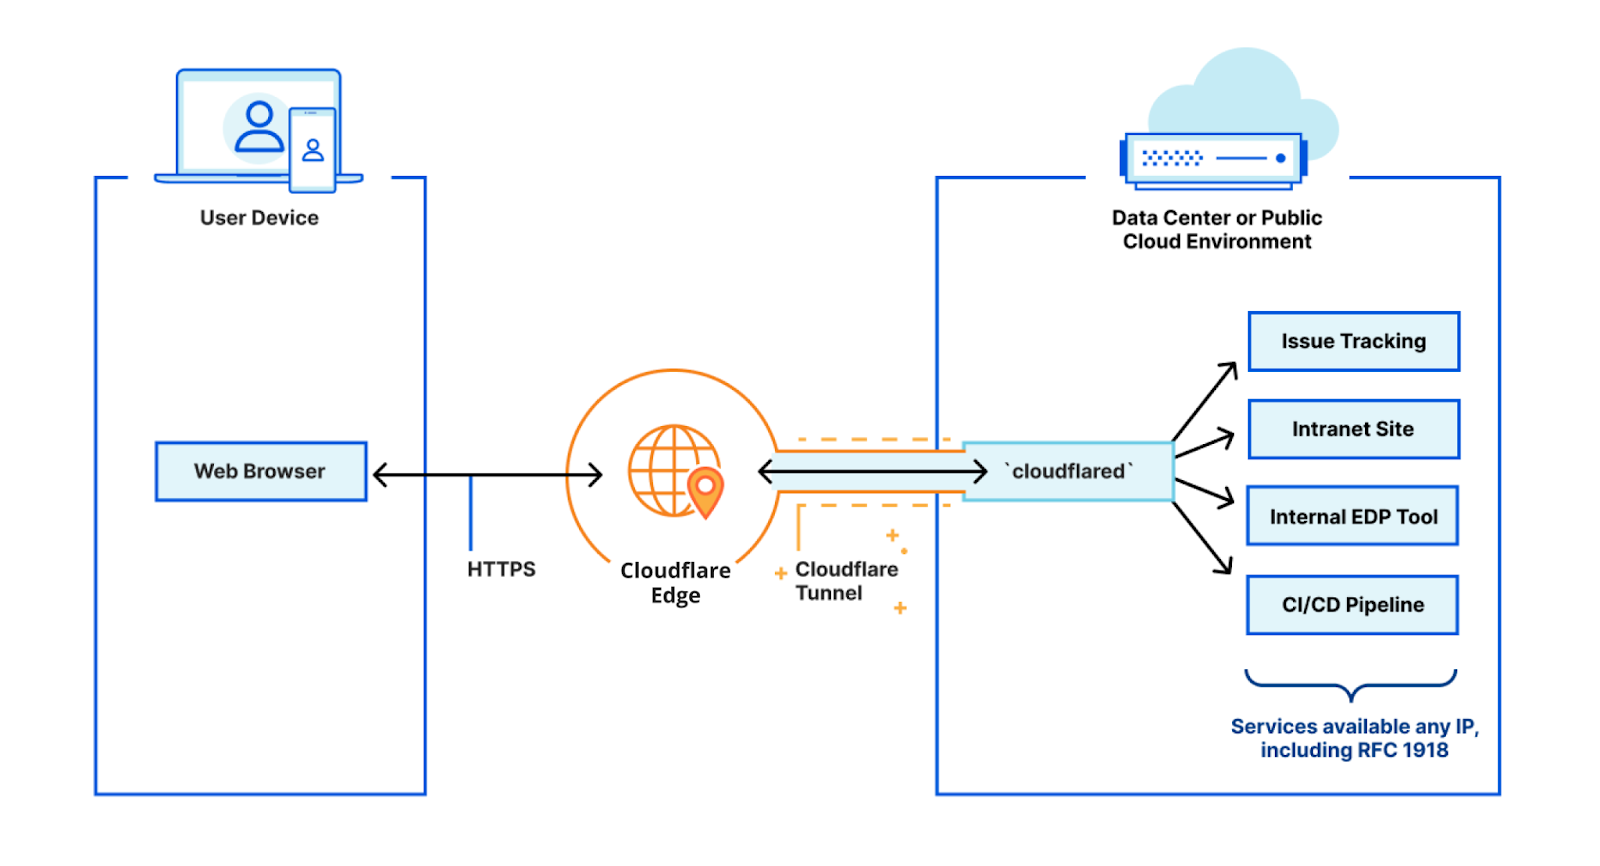 Getting Cloudflare Tunnels to connect to the Cloudflare Network with QUIC